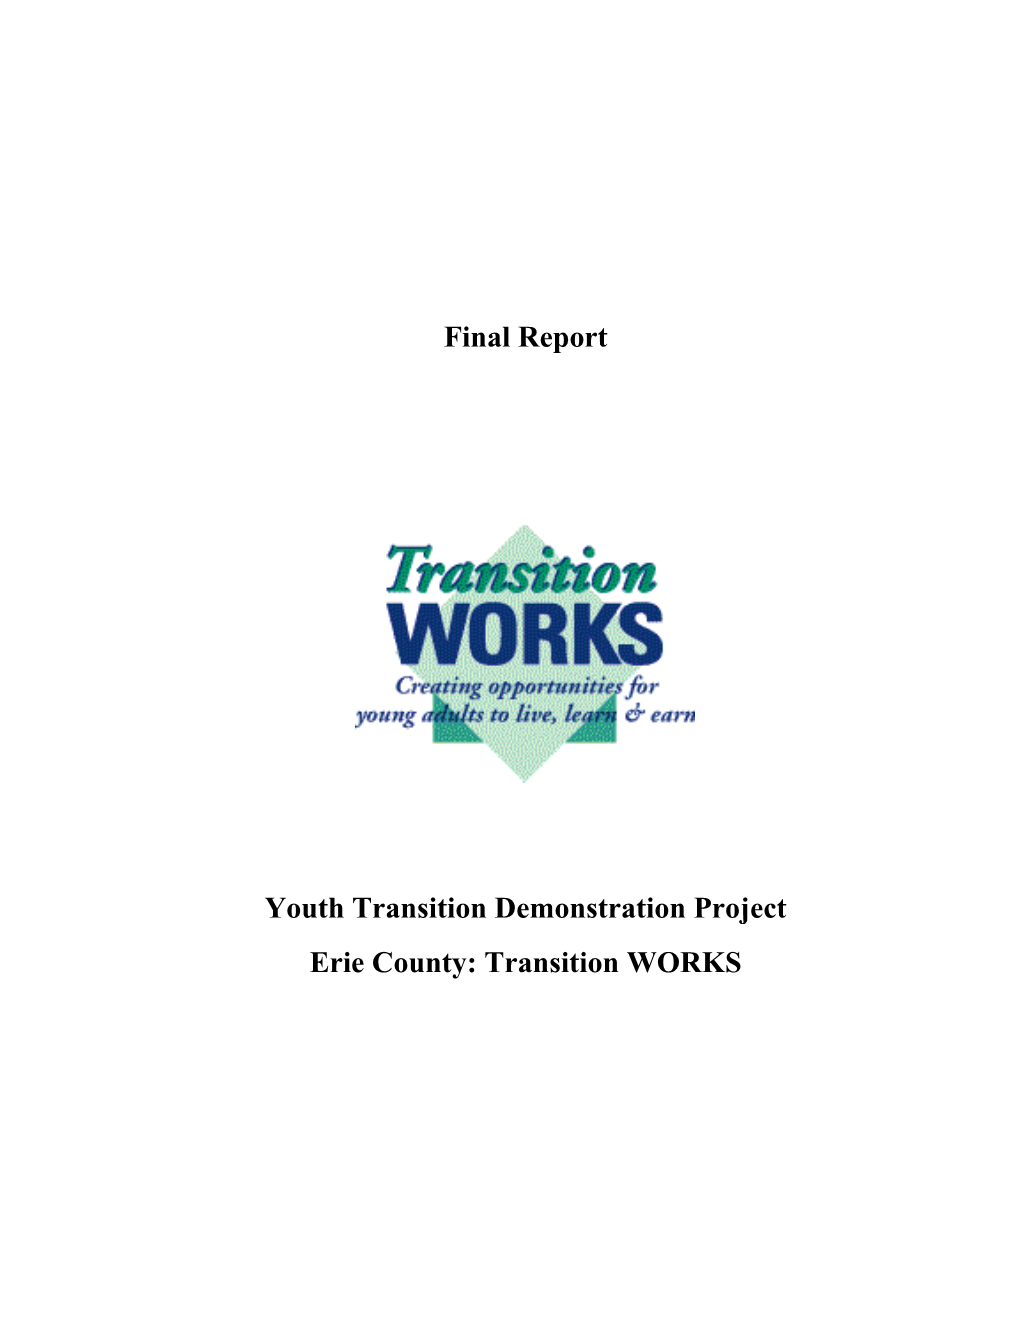 The Erie County, New York, Youth Transition Demonstration Project